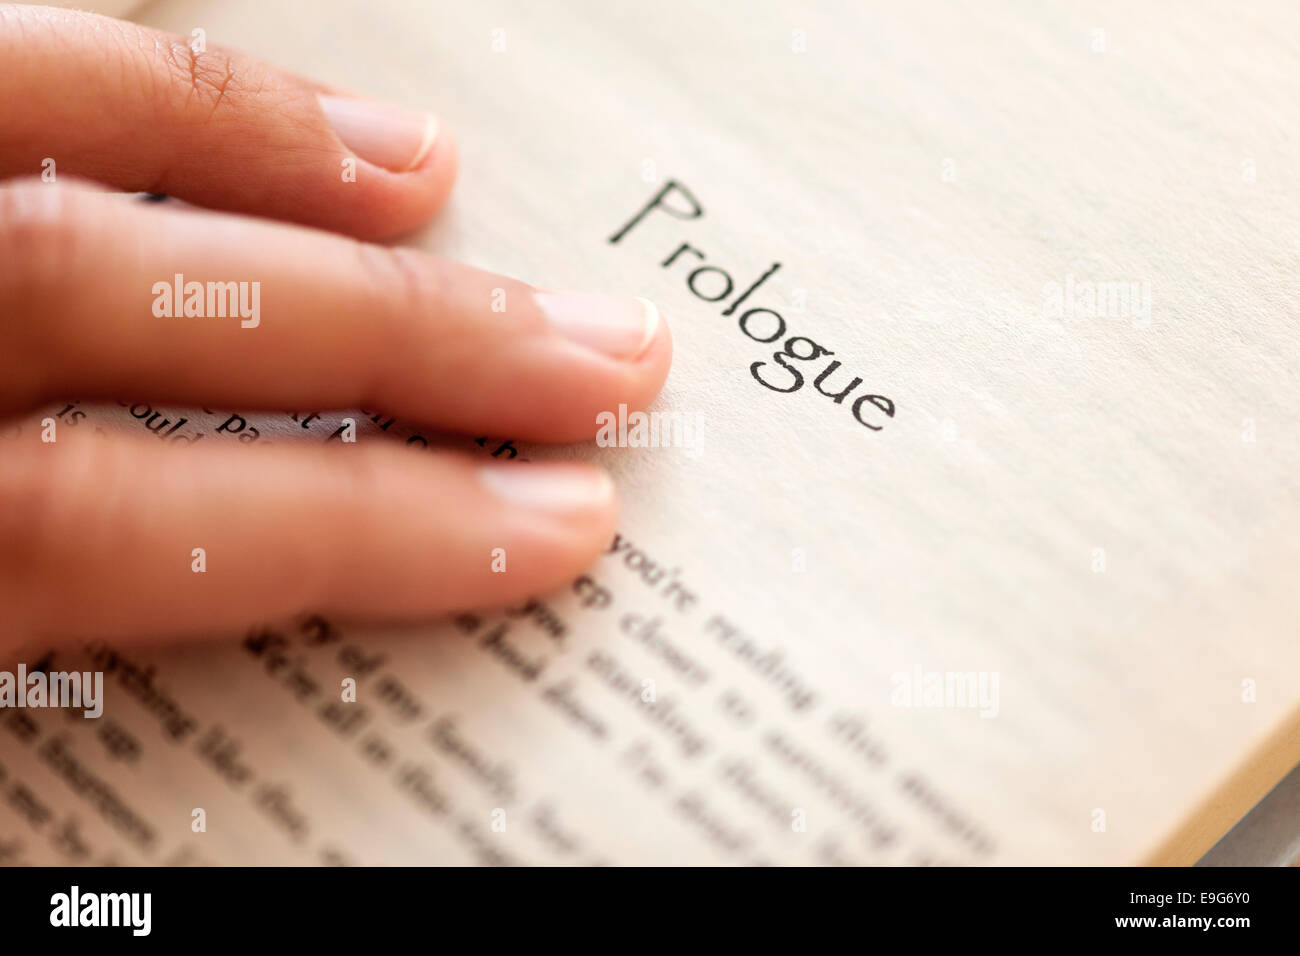 Woman's hand on book page with title 'Prologue'. Shallow depth of field. Stock Photo